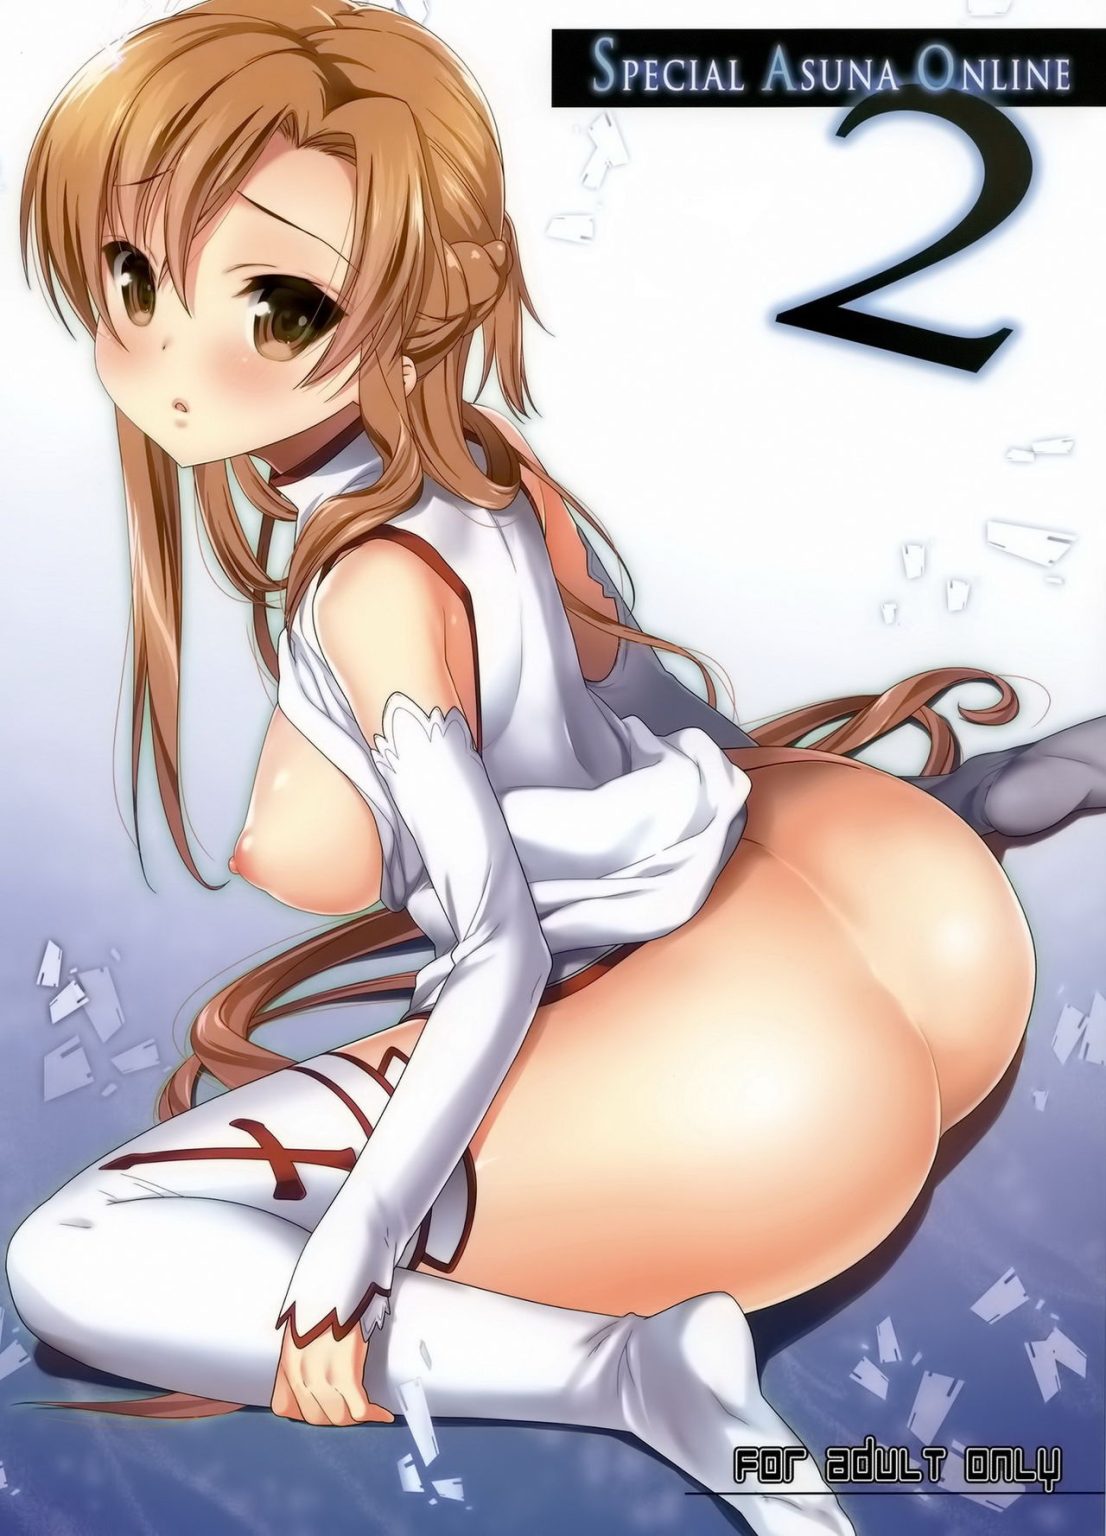 SPECIAL ASUNA ONLINE 2 hentai manga picture 1